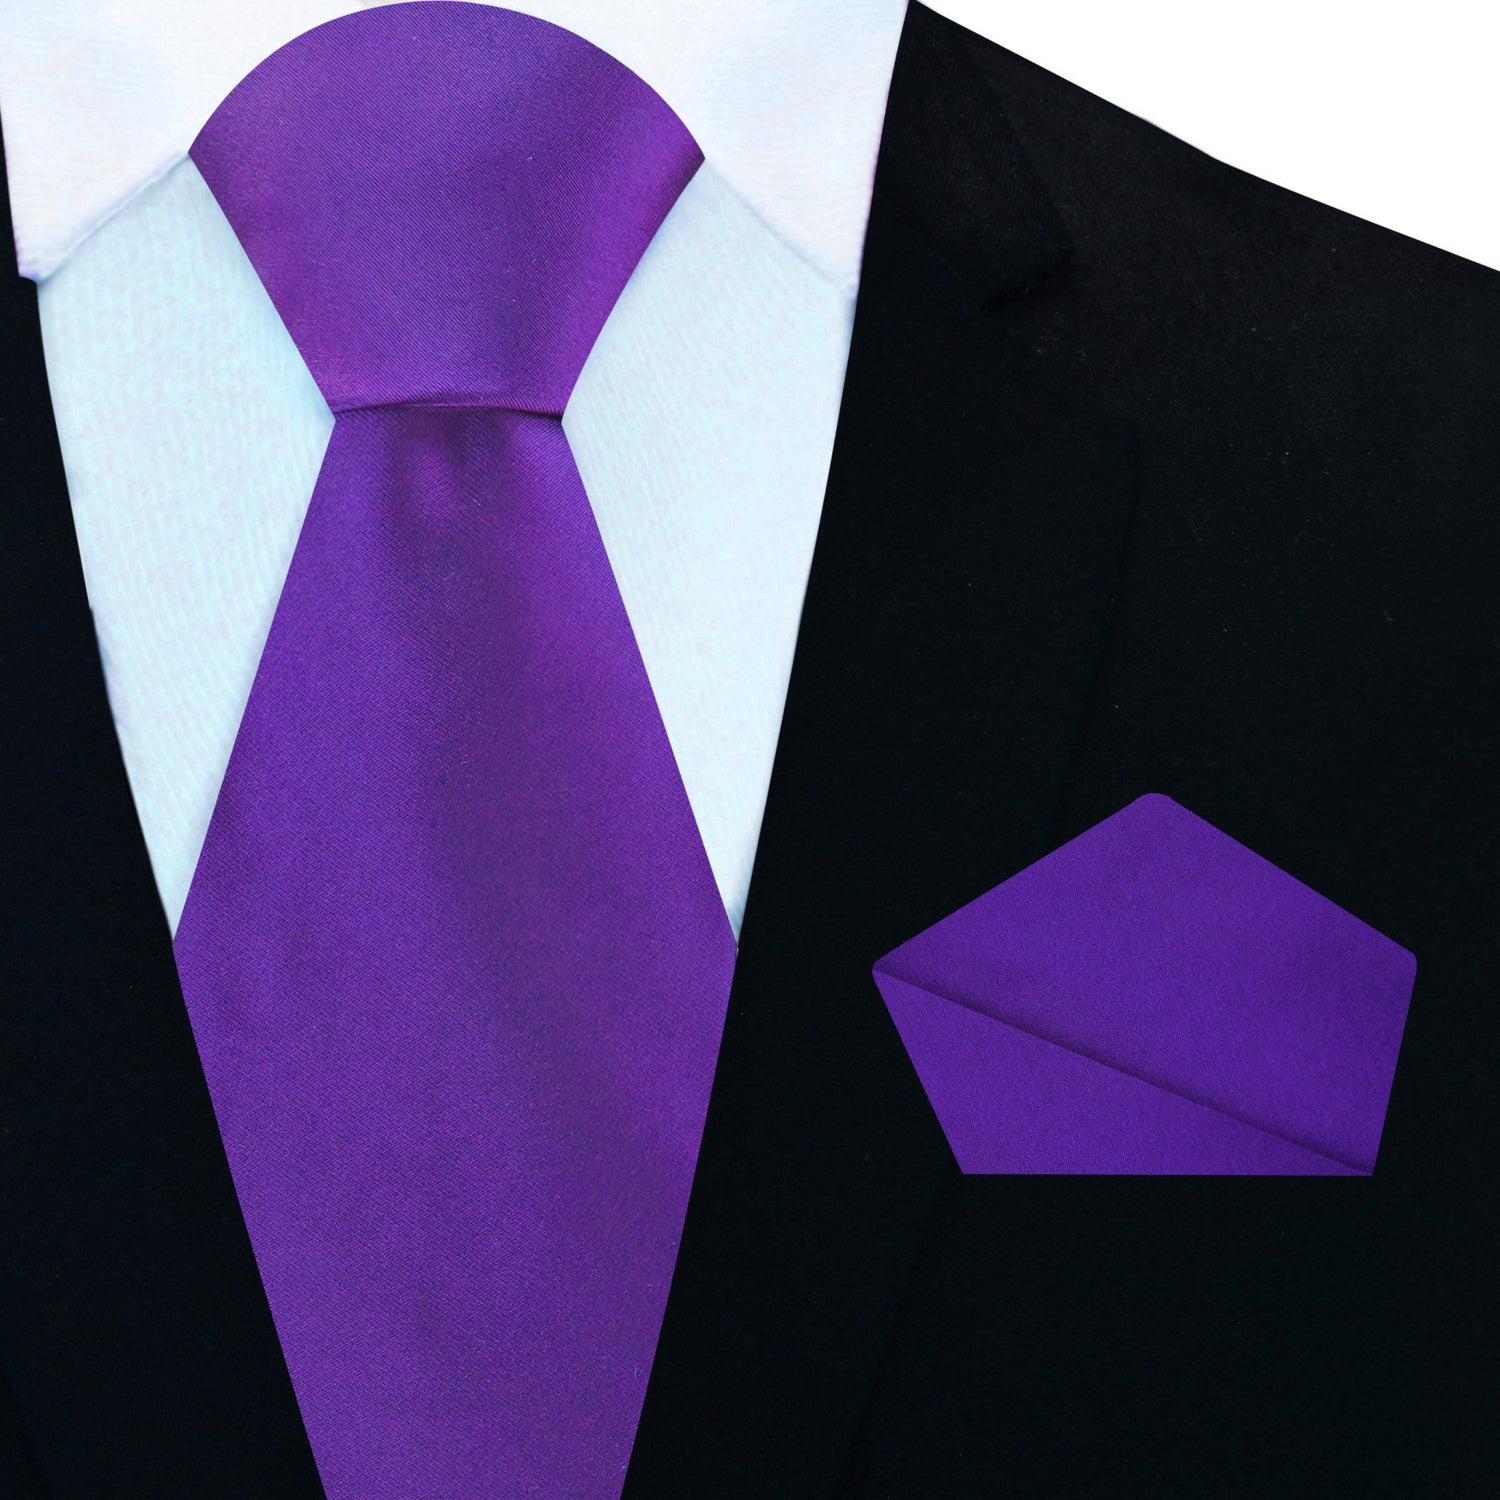 View 2: Purple Tie with Accenting Black, White and Square